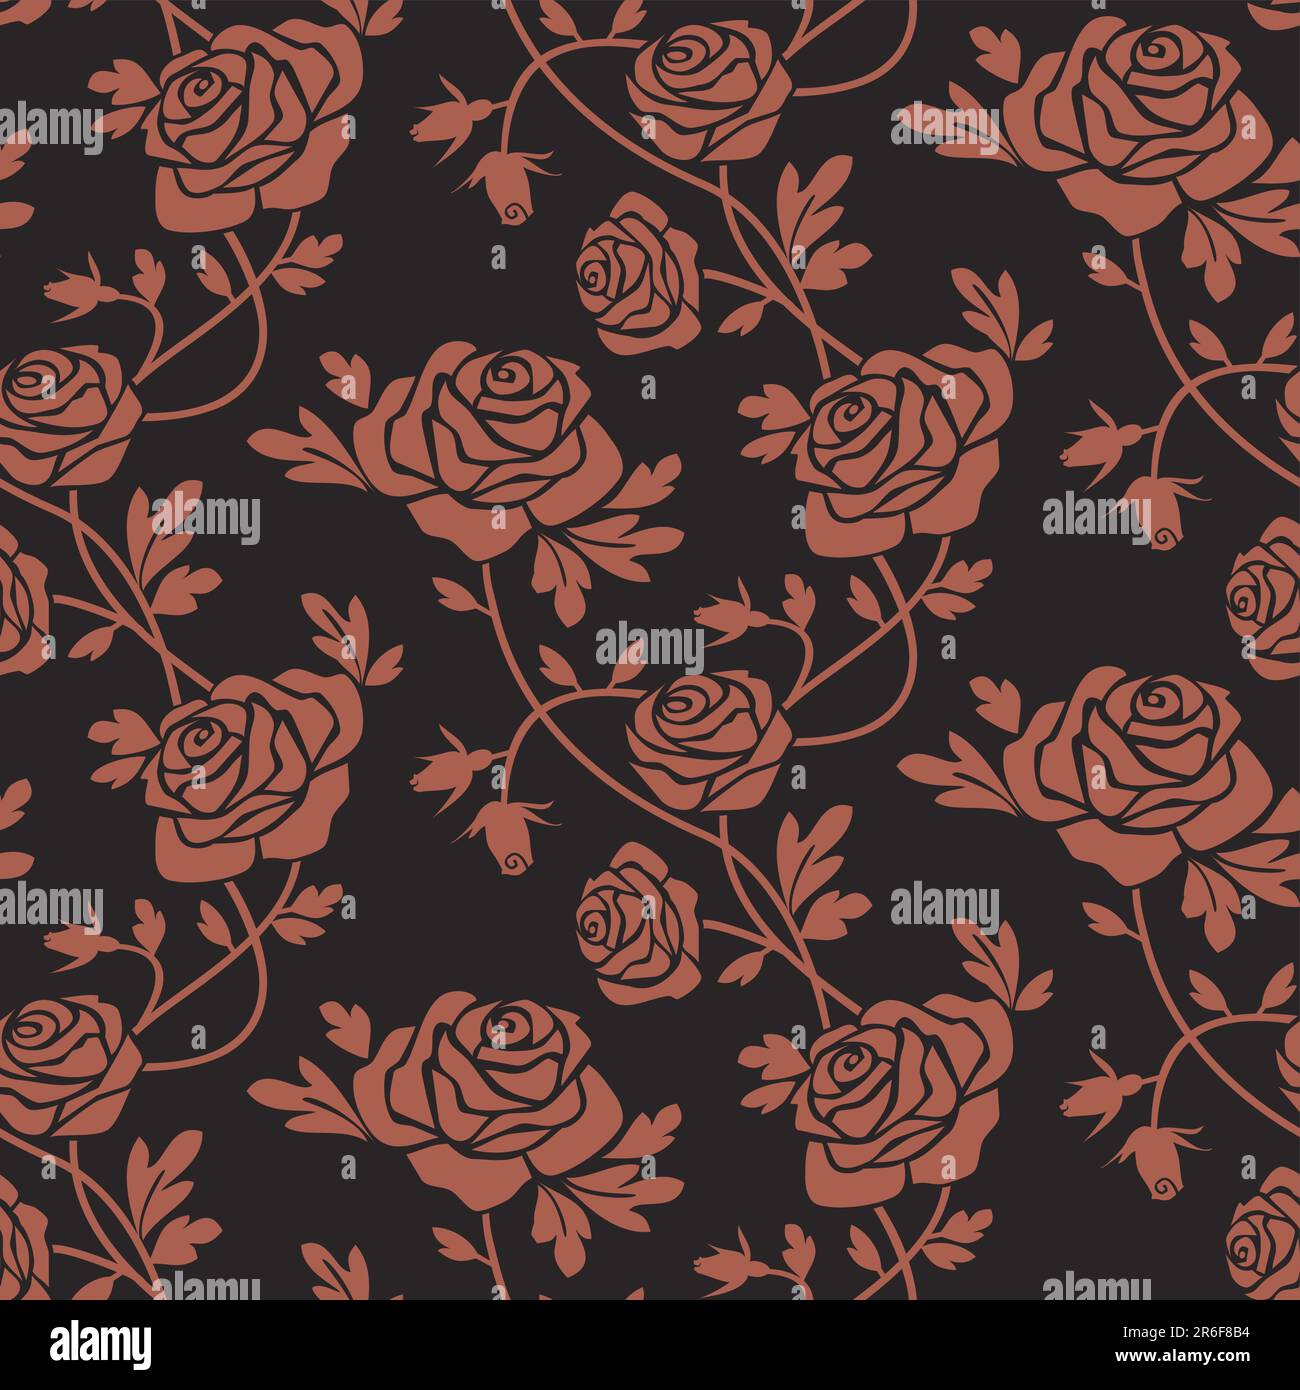 Romantic red roses at black background, seamless pattern. Full scalable vector graphic, change the colors as you like and 300 dpi JPG. Stock Vector